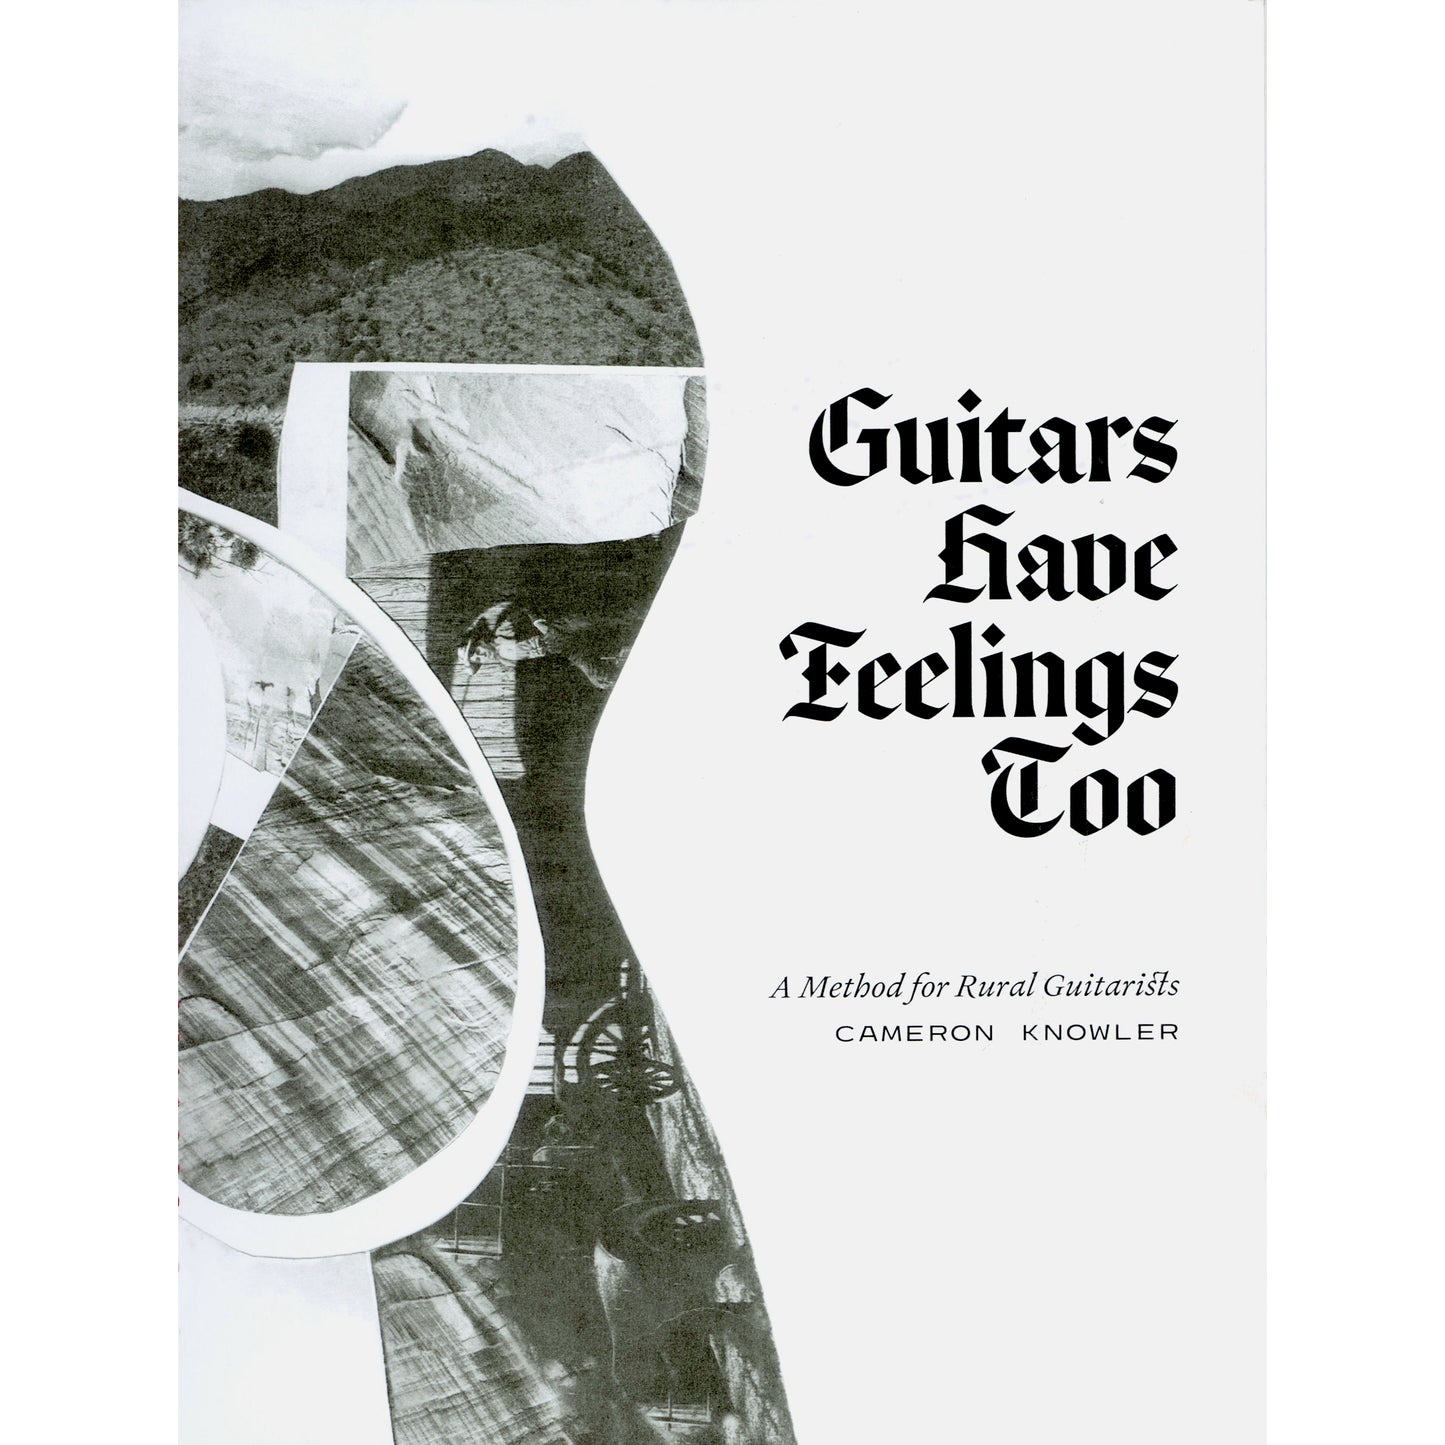 Image 1, Cover of Guitars Have Feelings Too : A Method for Rural Guitarists by Cameron Knowler SKU: 823-1